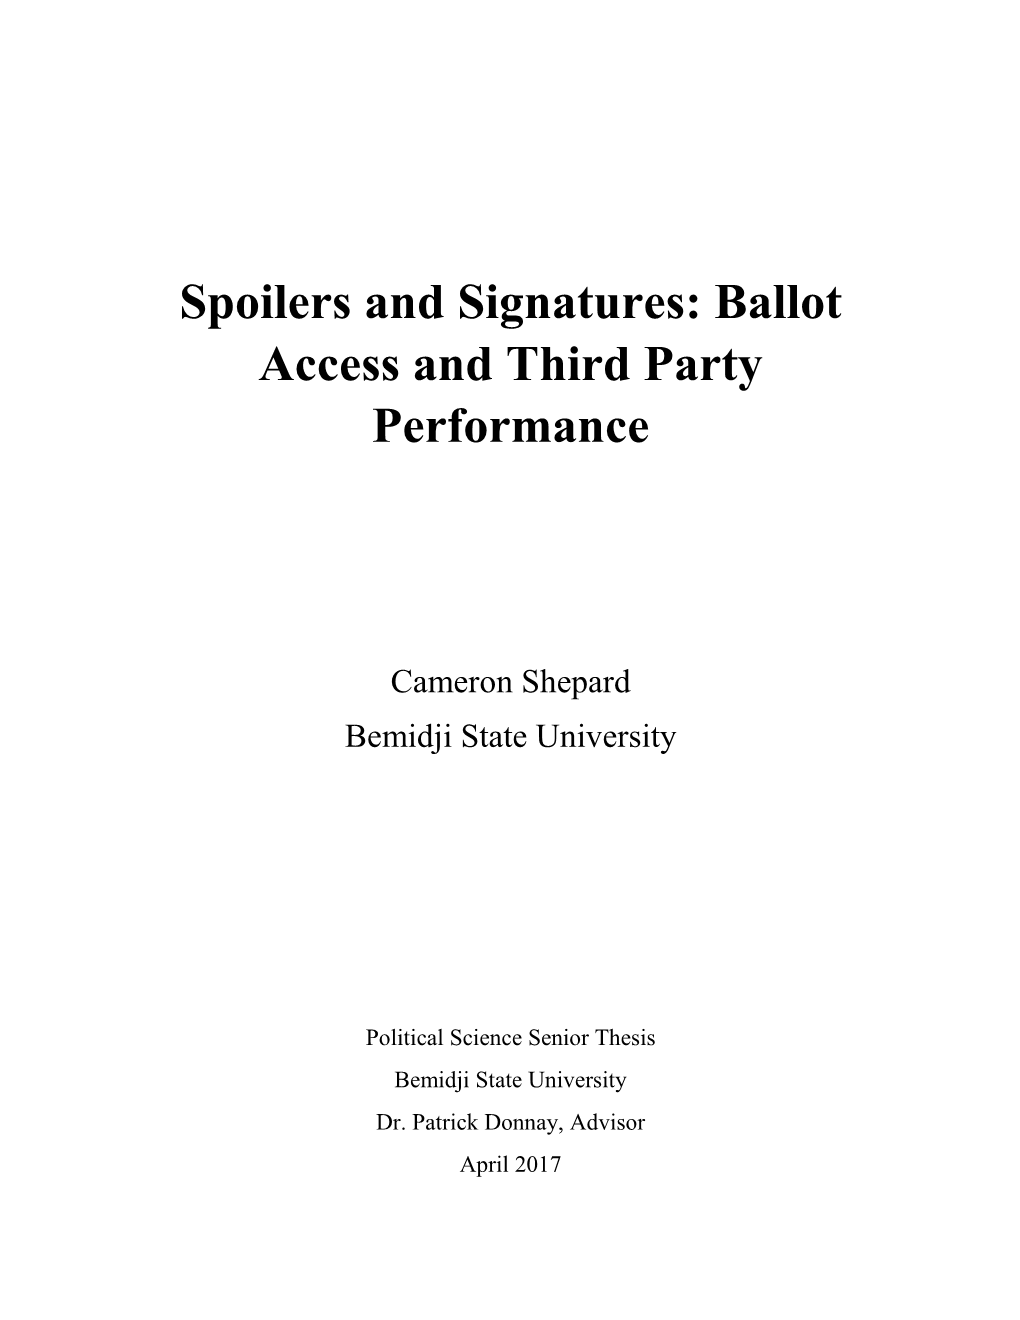 Spoilers and Signatures: Ballot Access and Third Party Performance